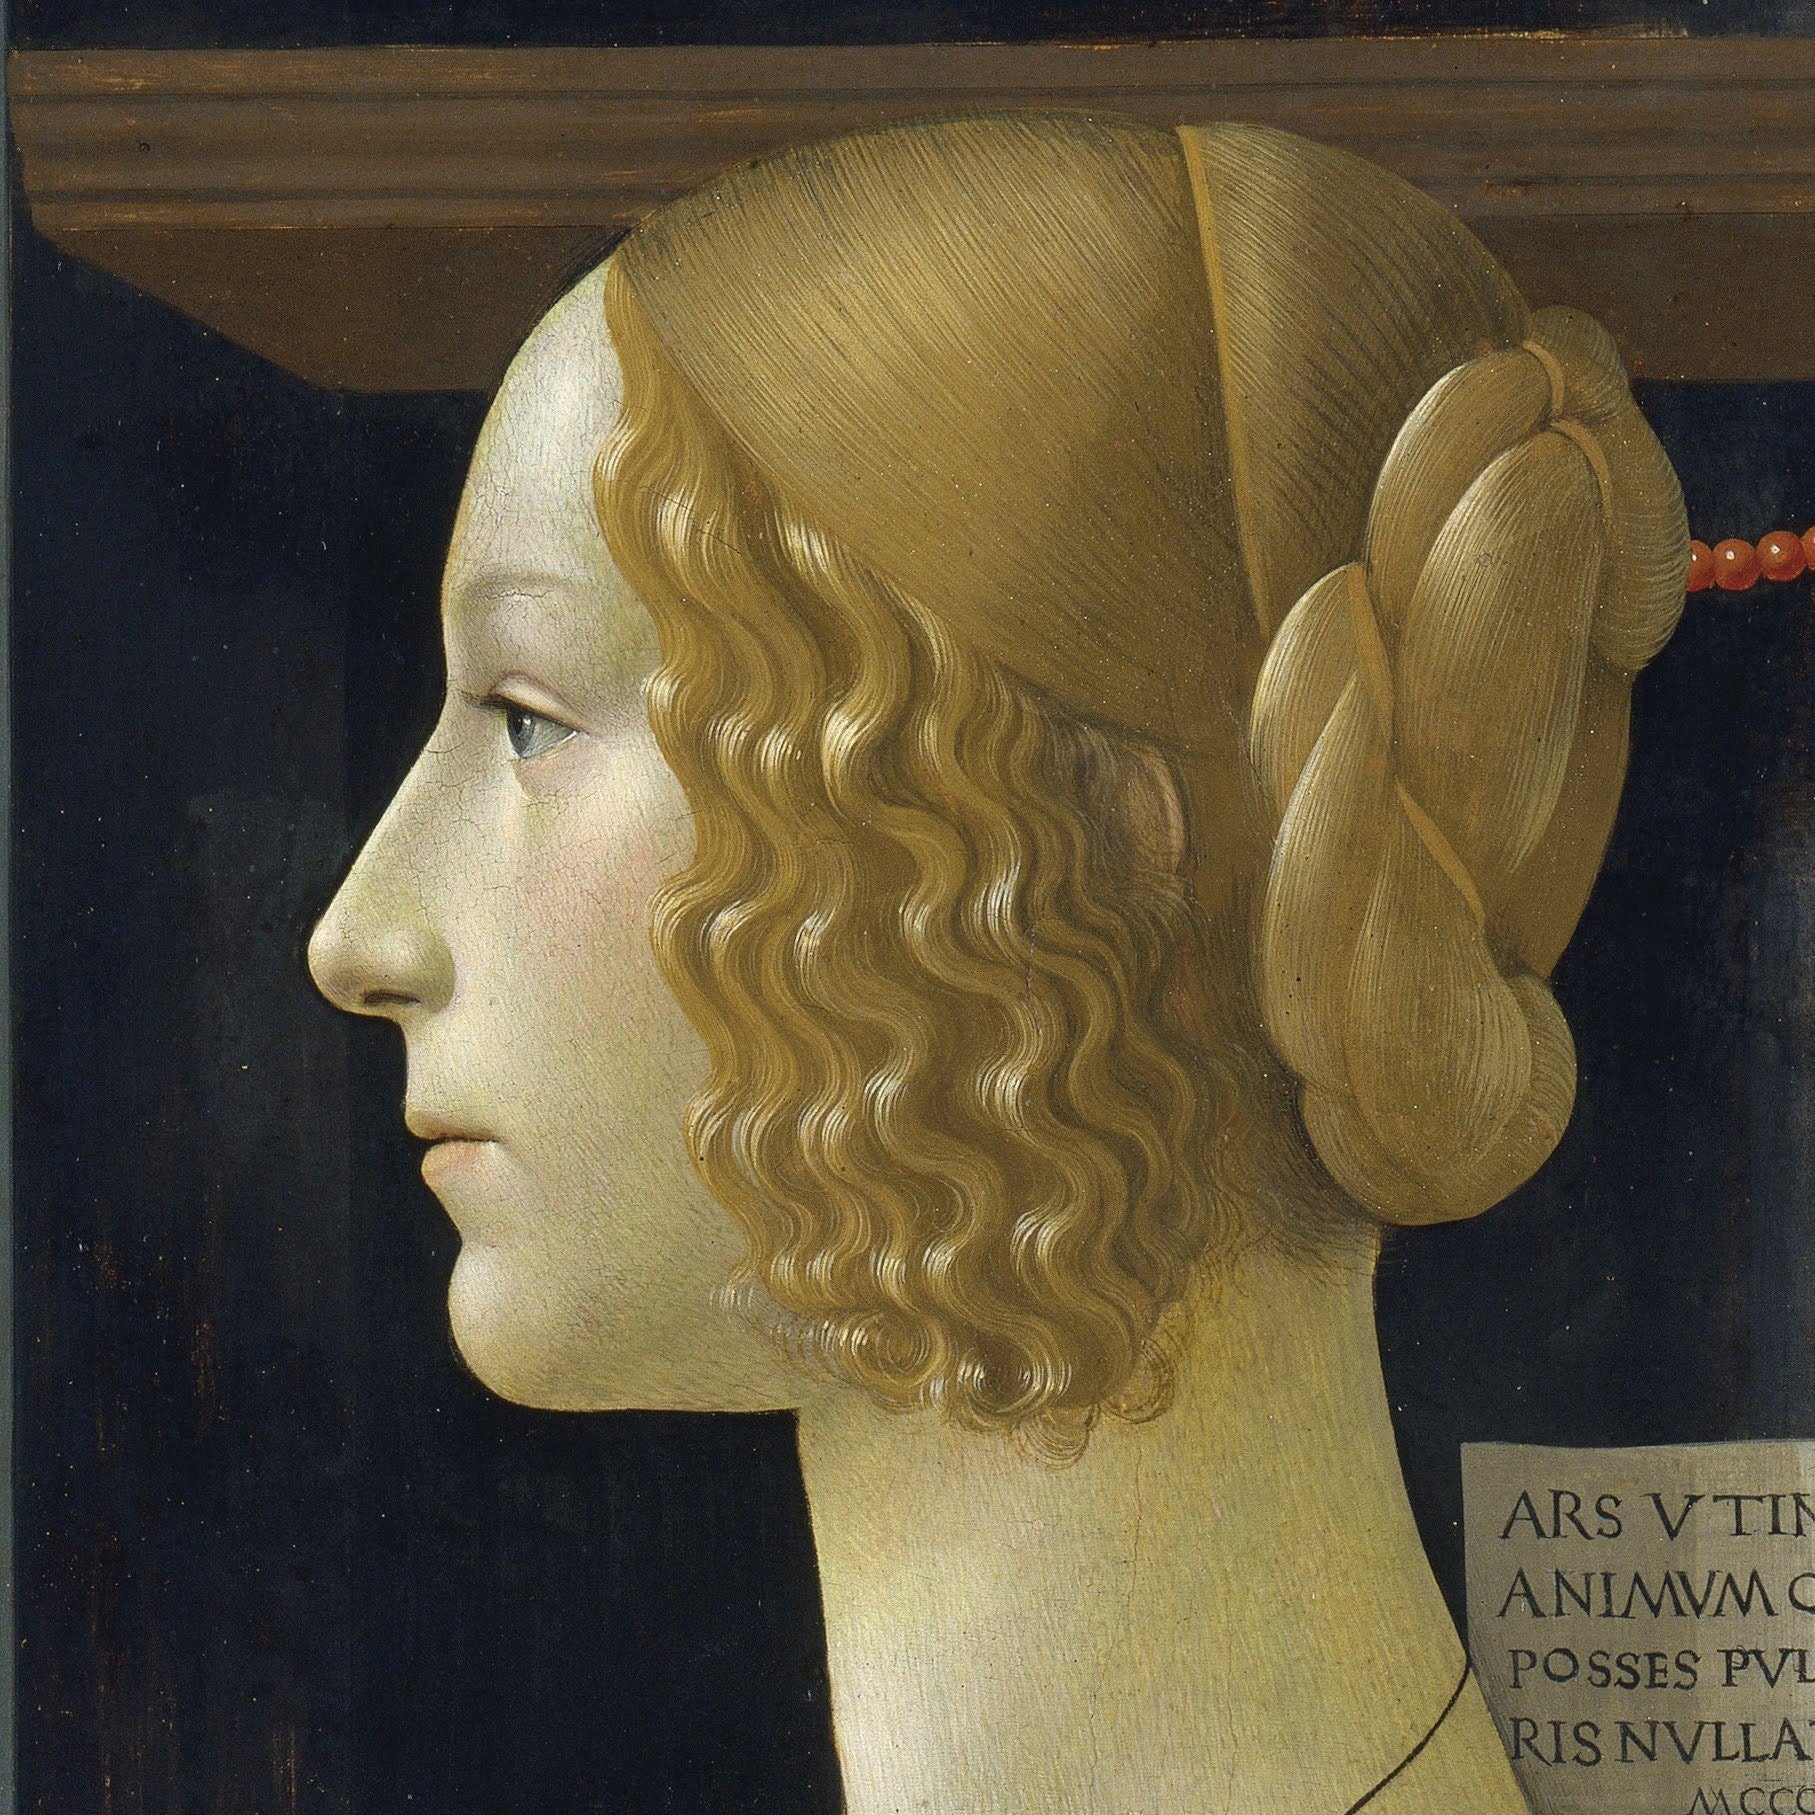 Portrait of Giovanna by Domenico Ghirlandaio, 3d Printed with texture and brush strokes looks like original oil-painting, code:084